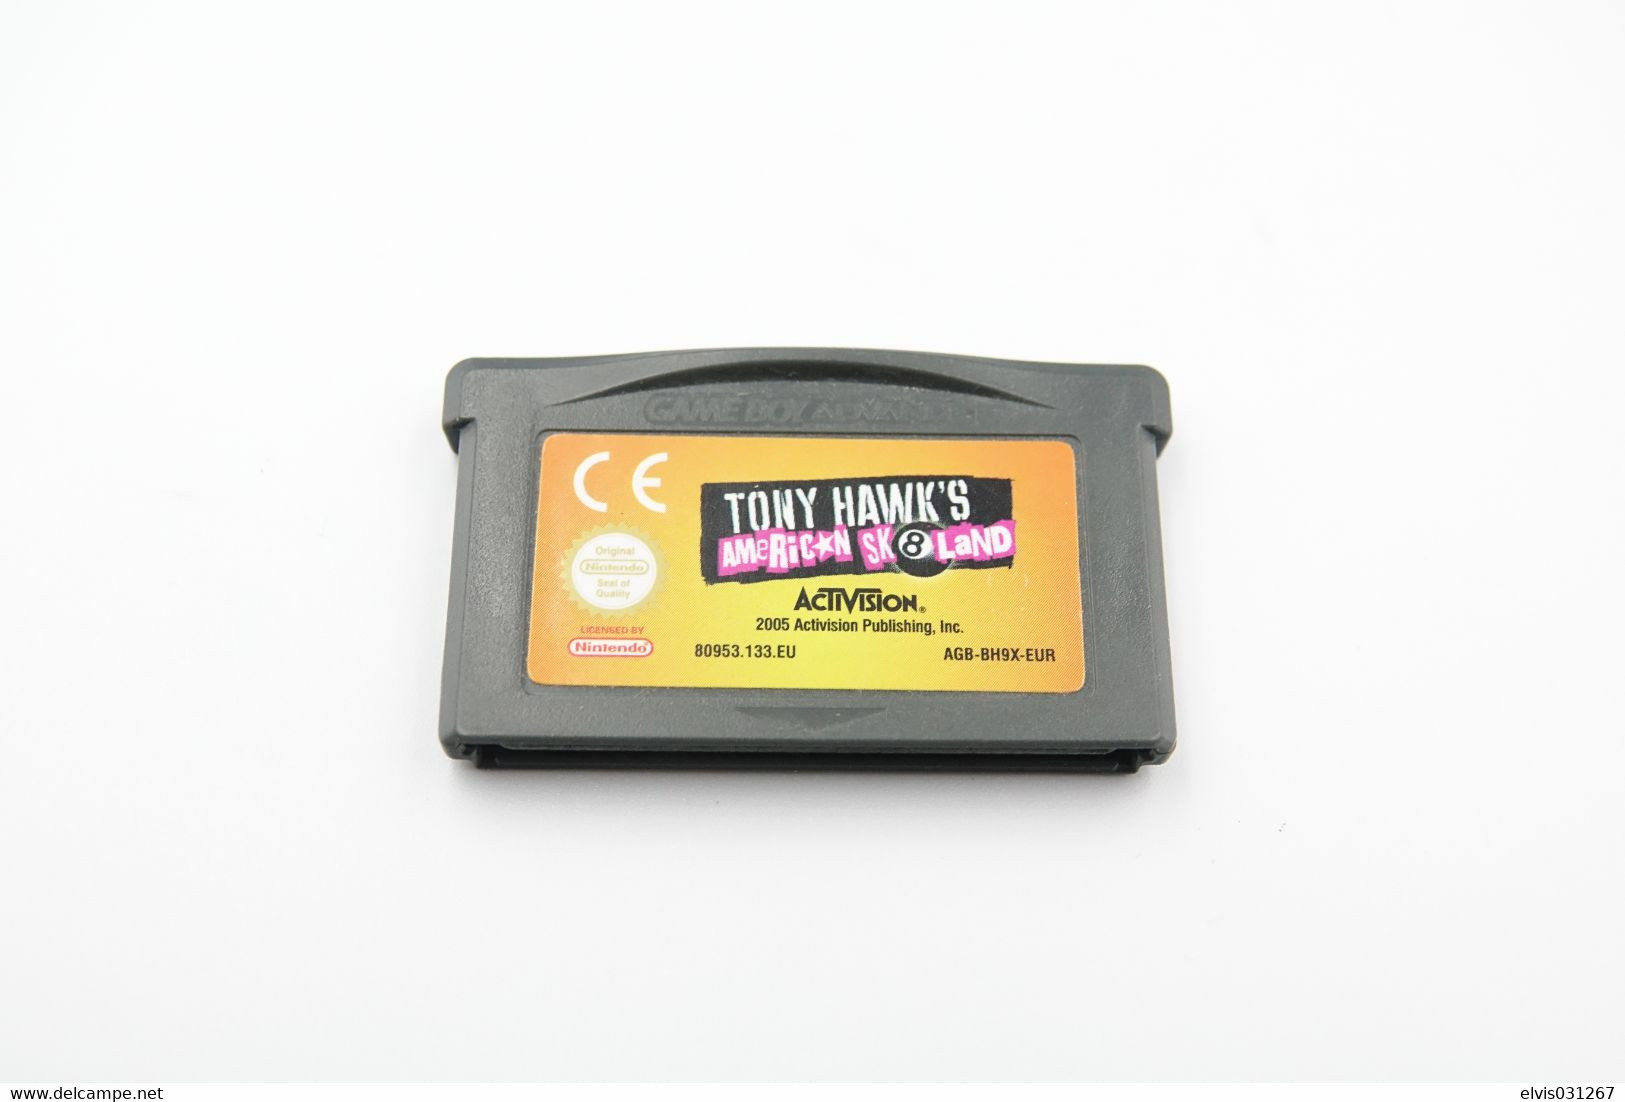 NINTENDO GAMEBOY ADVANCE: TONY HAWK 'S AMERICAN SK8LAND WITH BOX - ACTIVISION - 2005 - Game Boy Advance